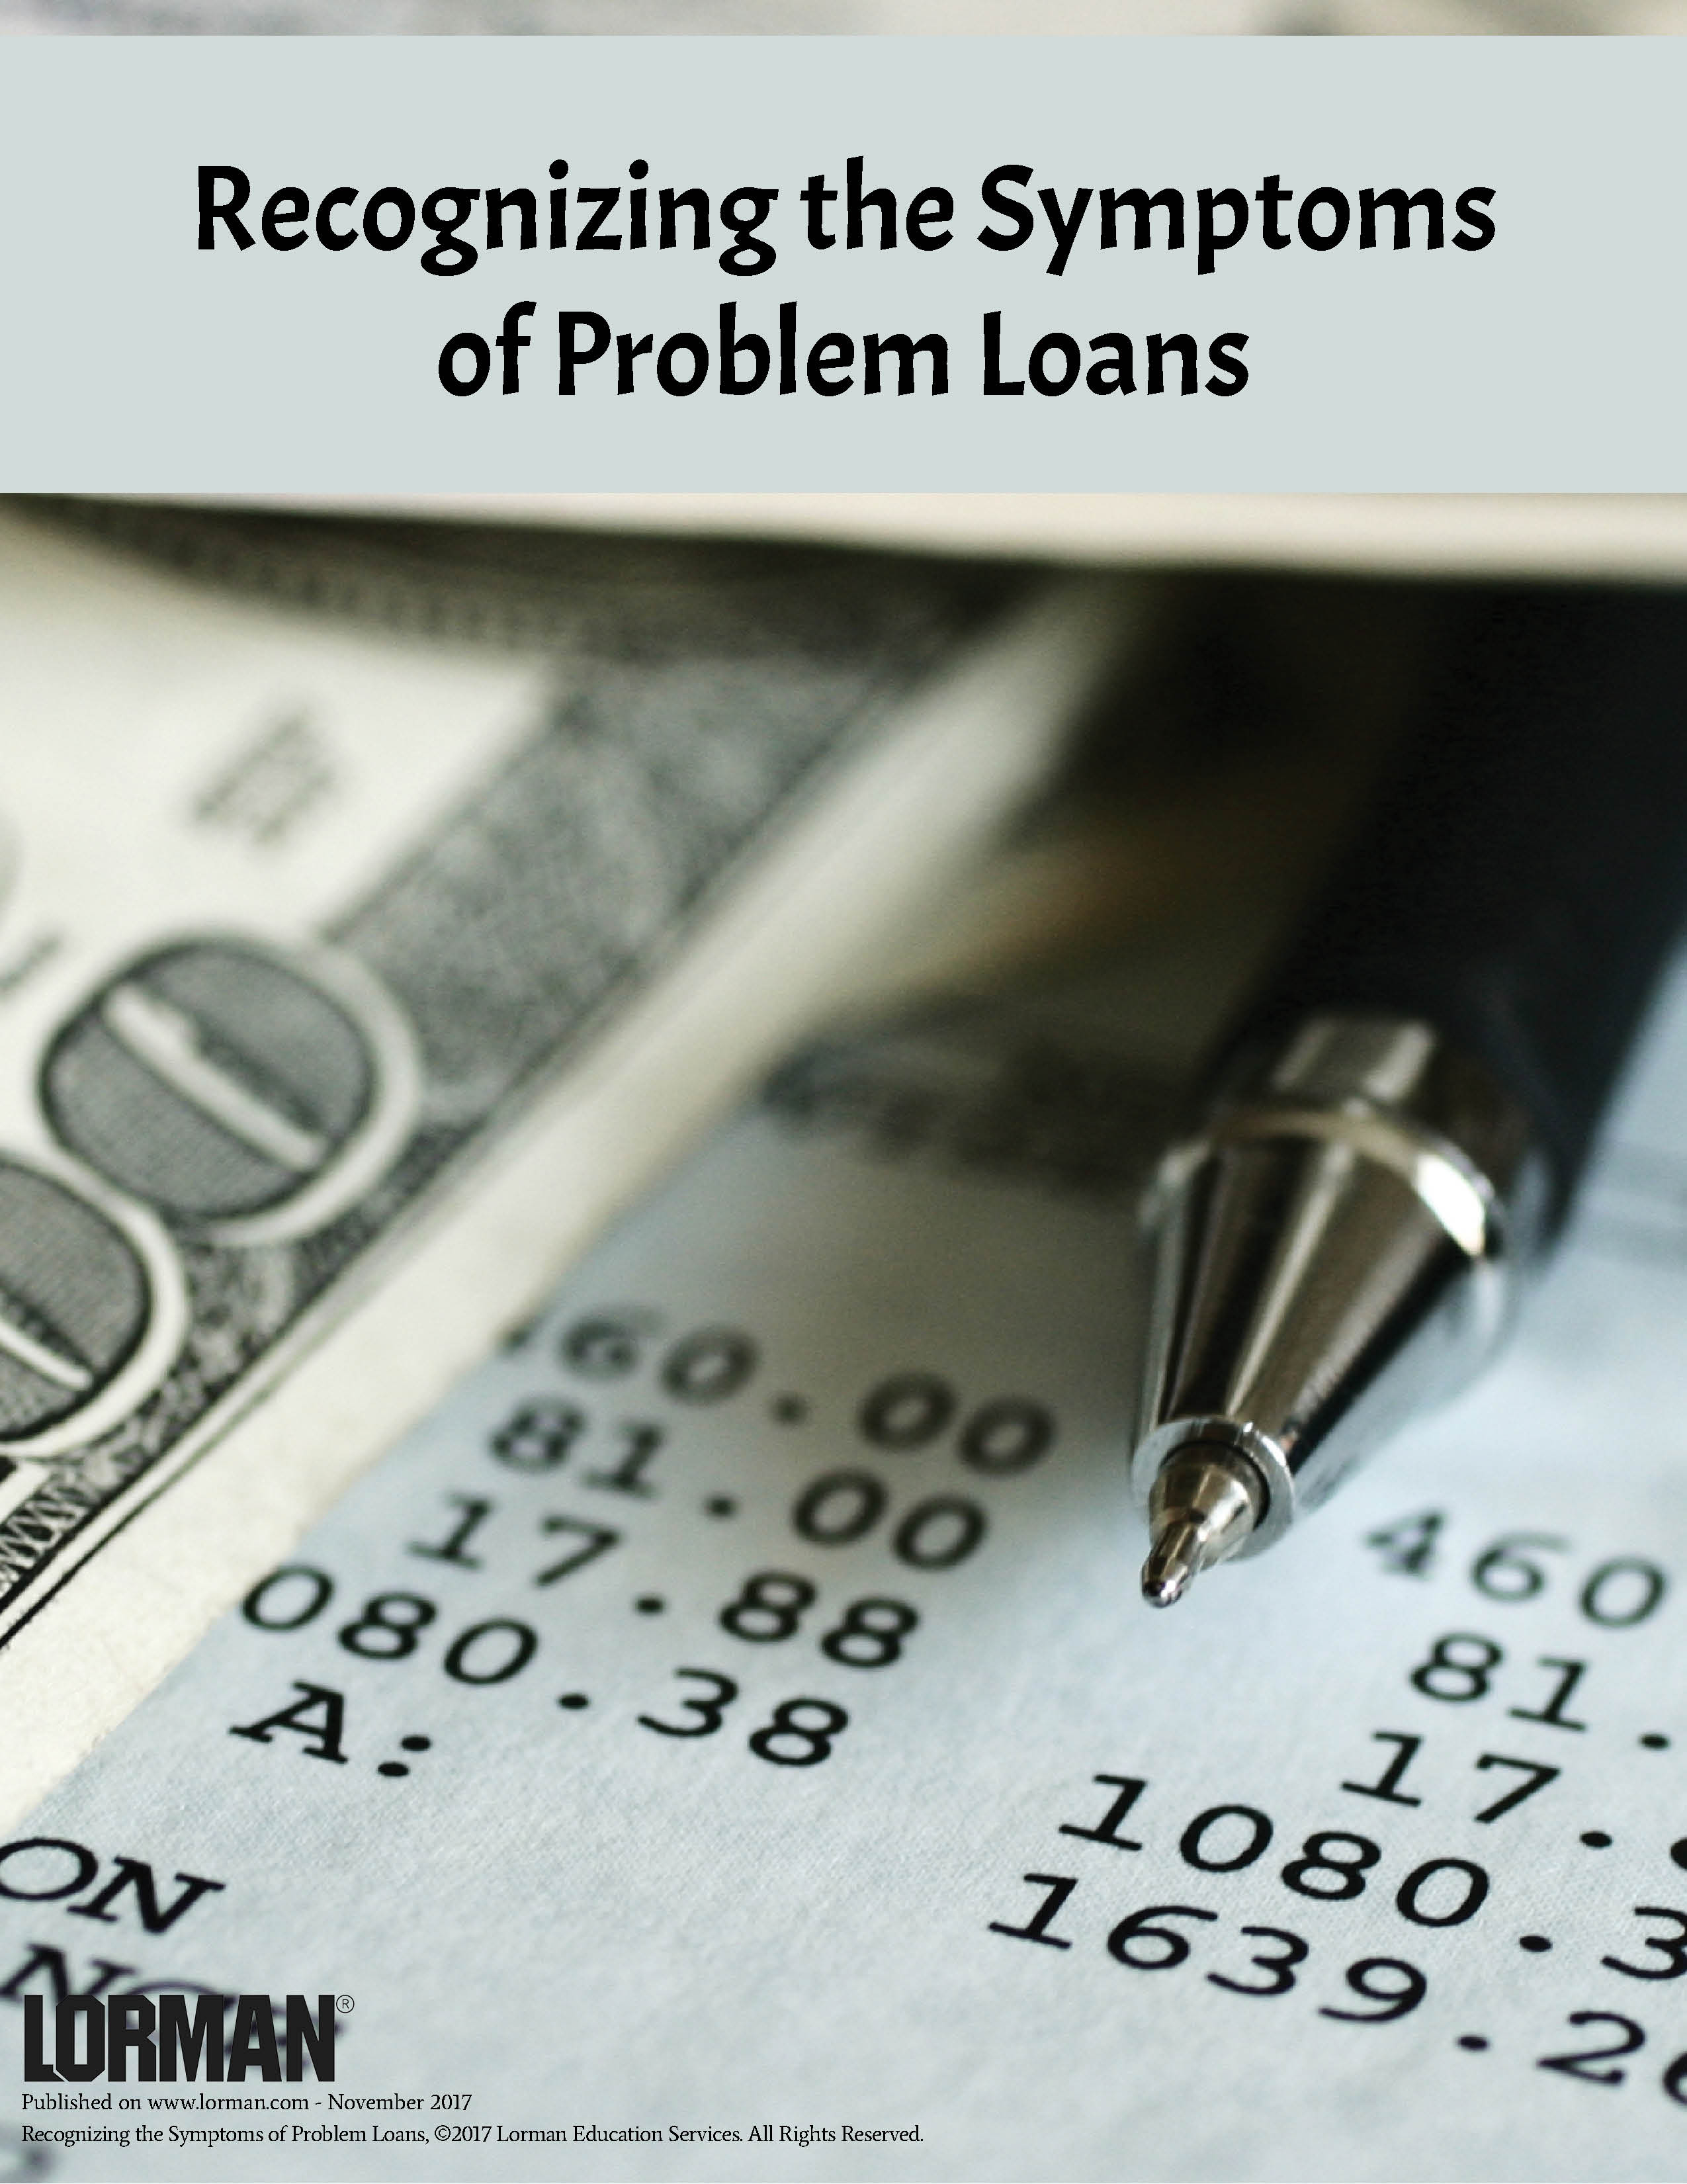 Recognizing the Symptoms of Problem Loans